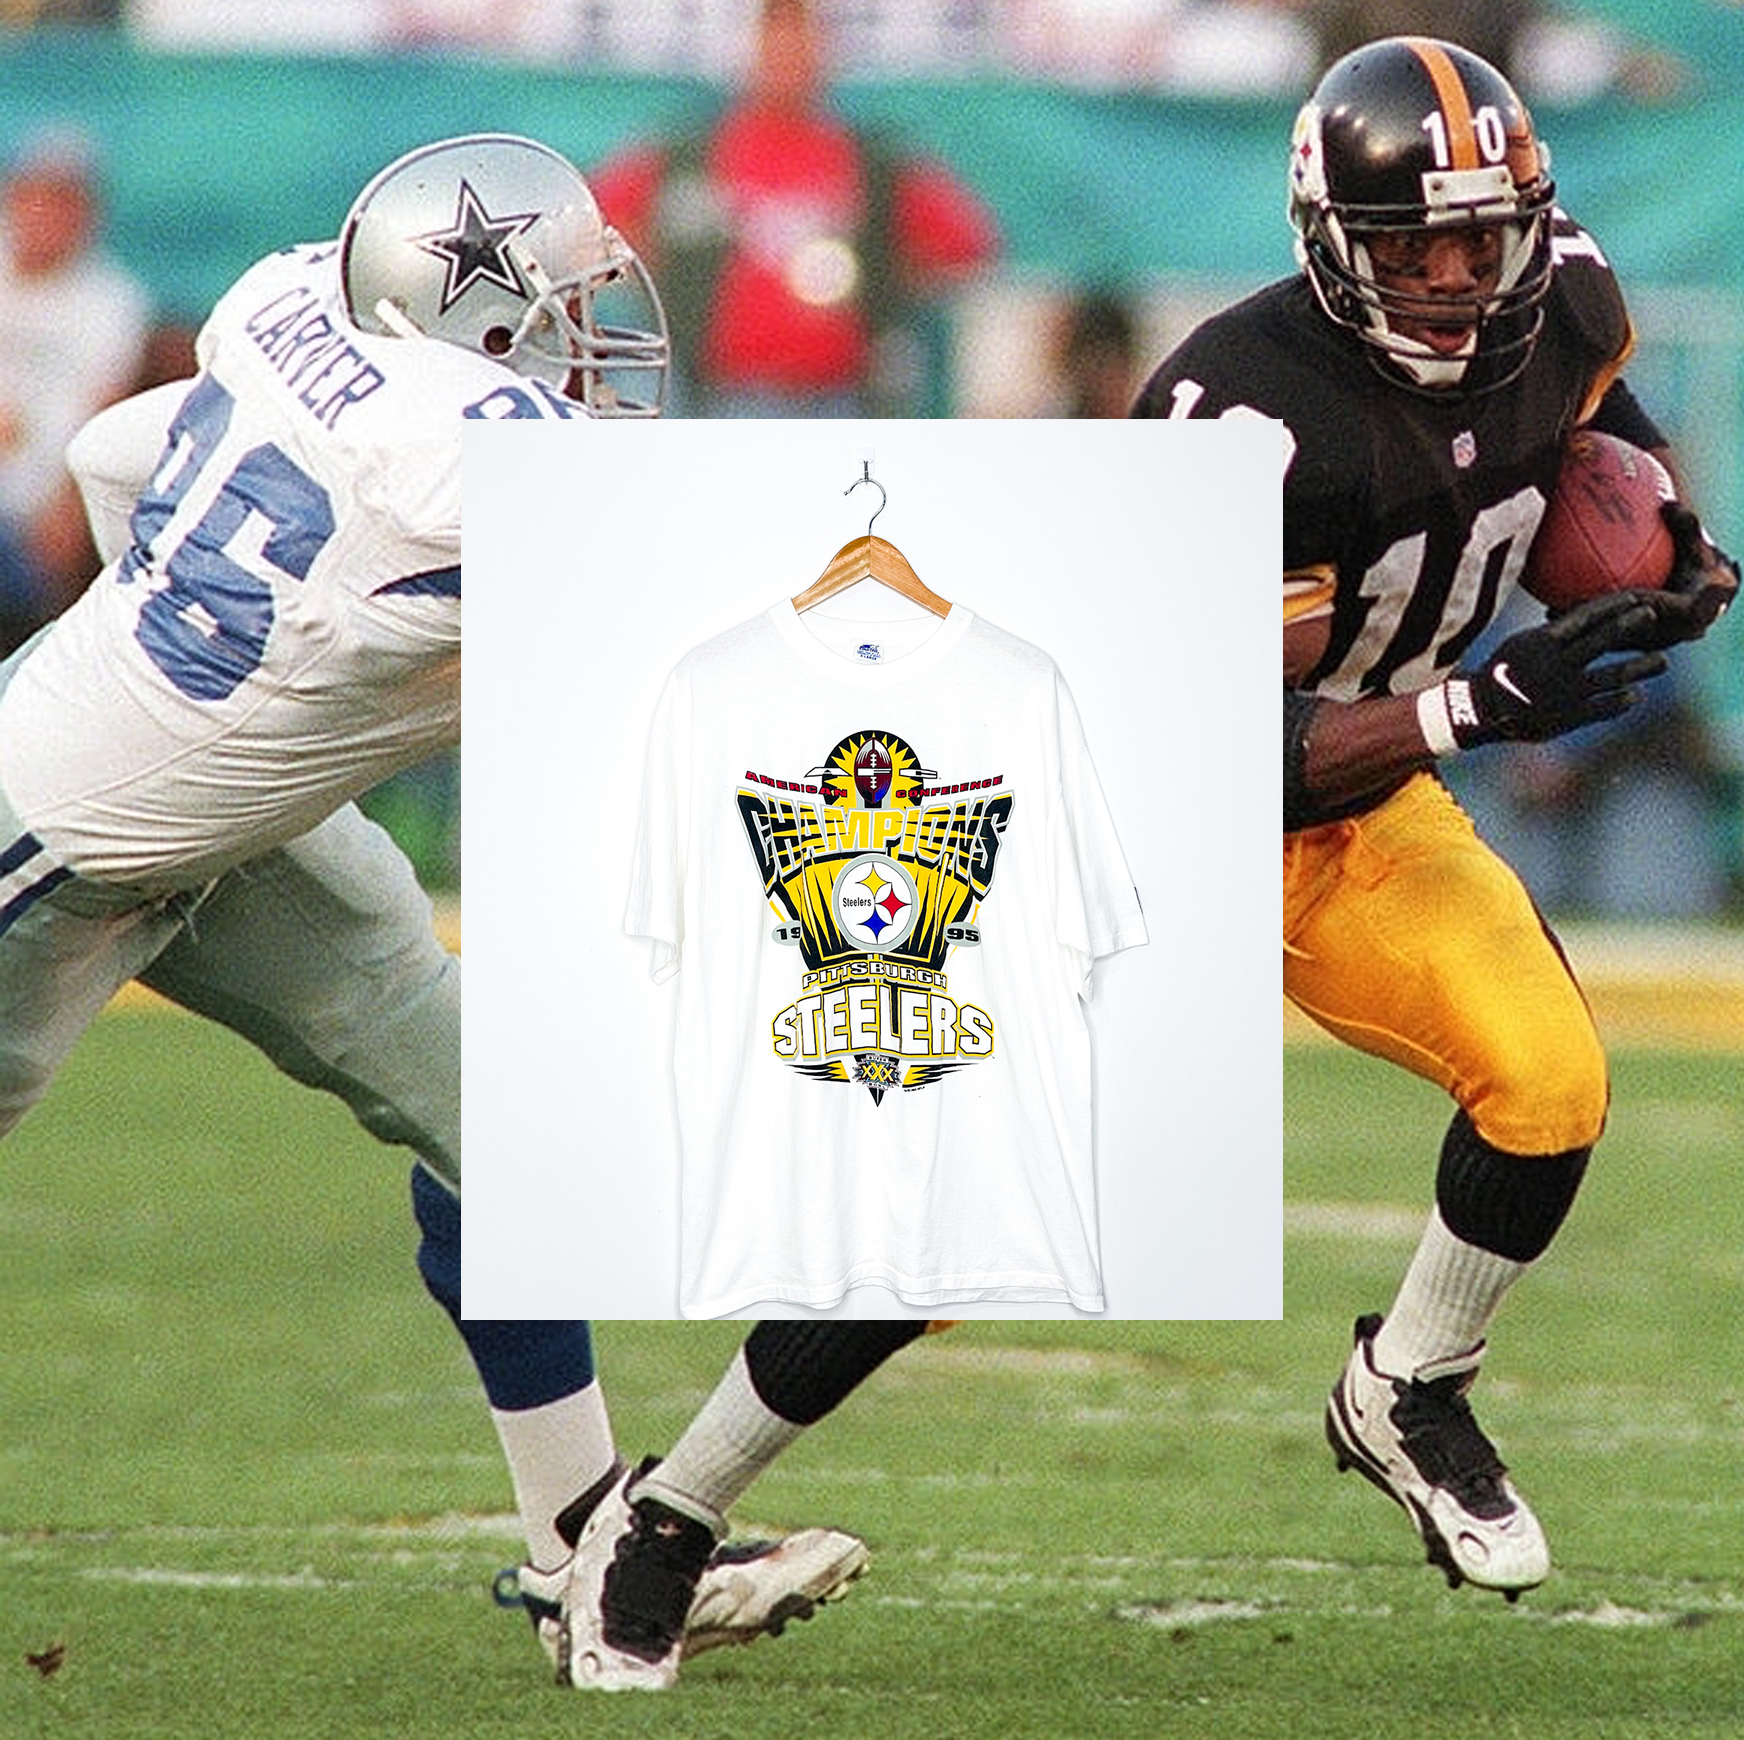 PITTSBURGH STEELERS "Super Bowl XXX AFC Champions" VINTAGE TEE